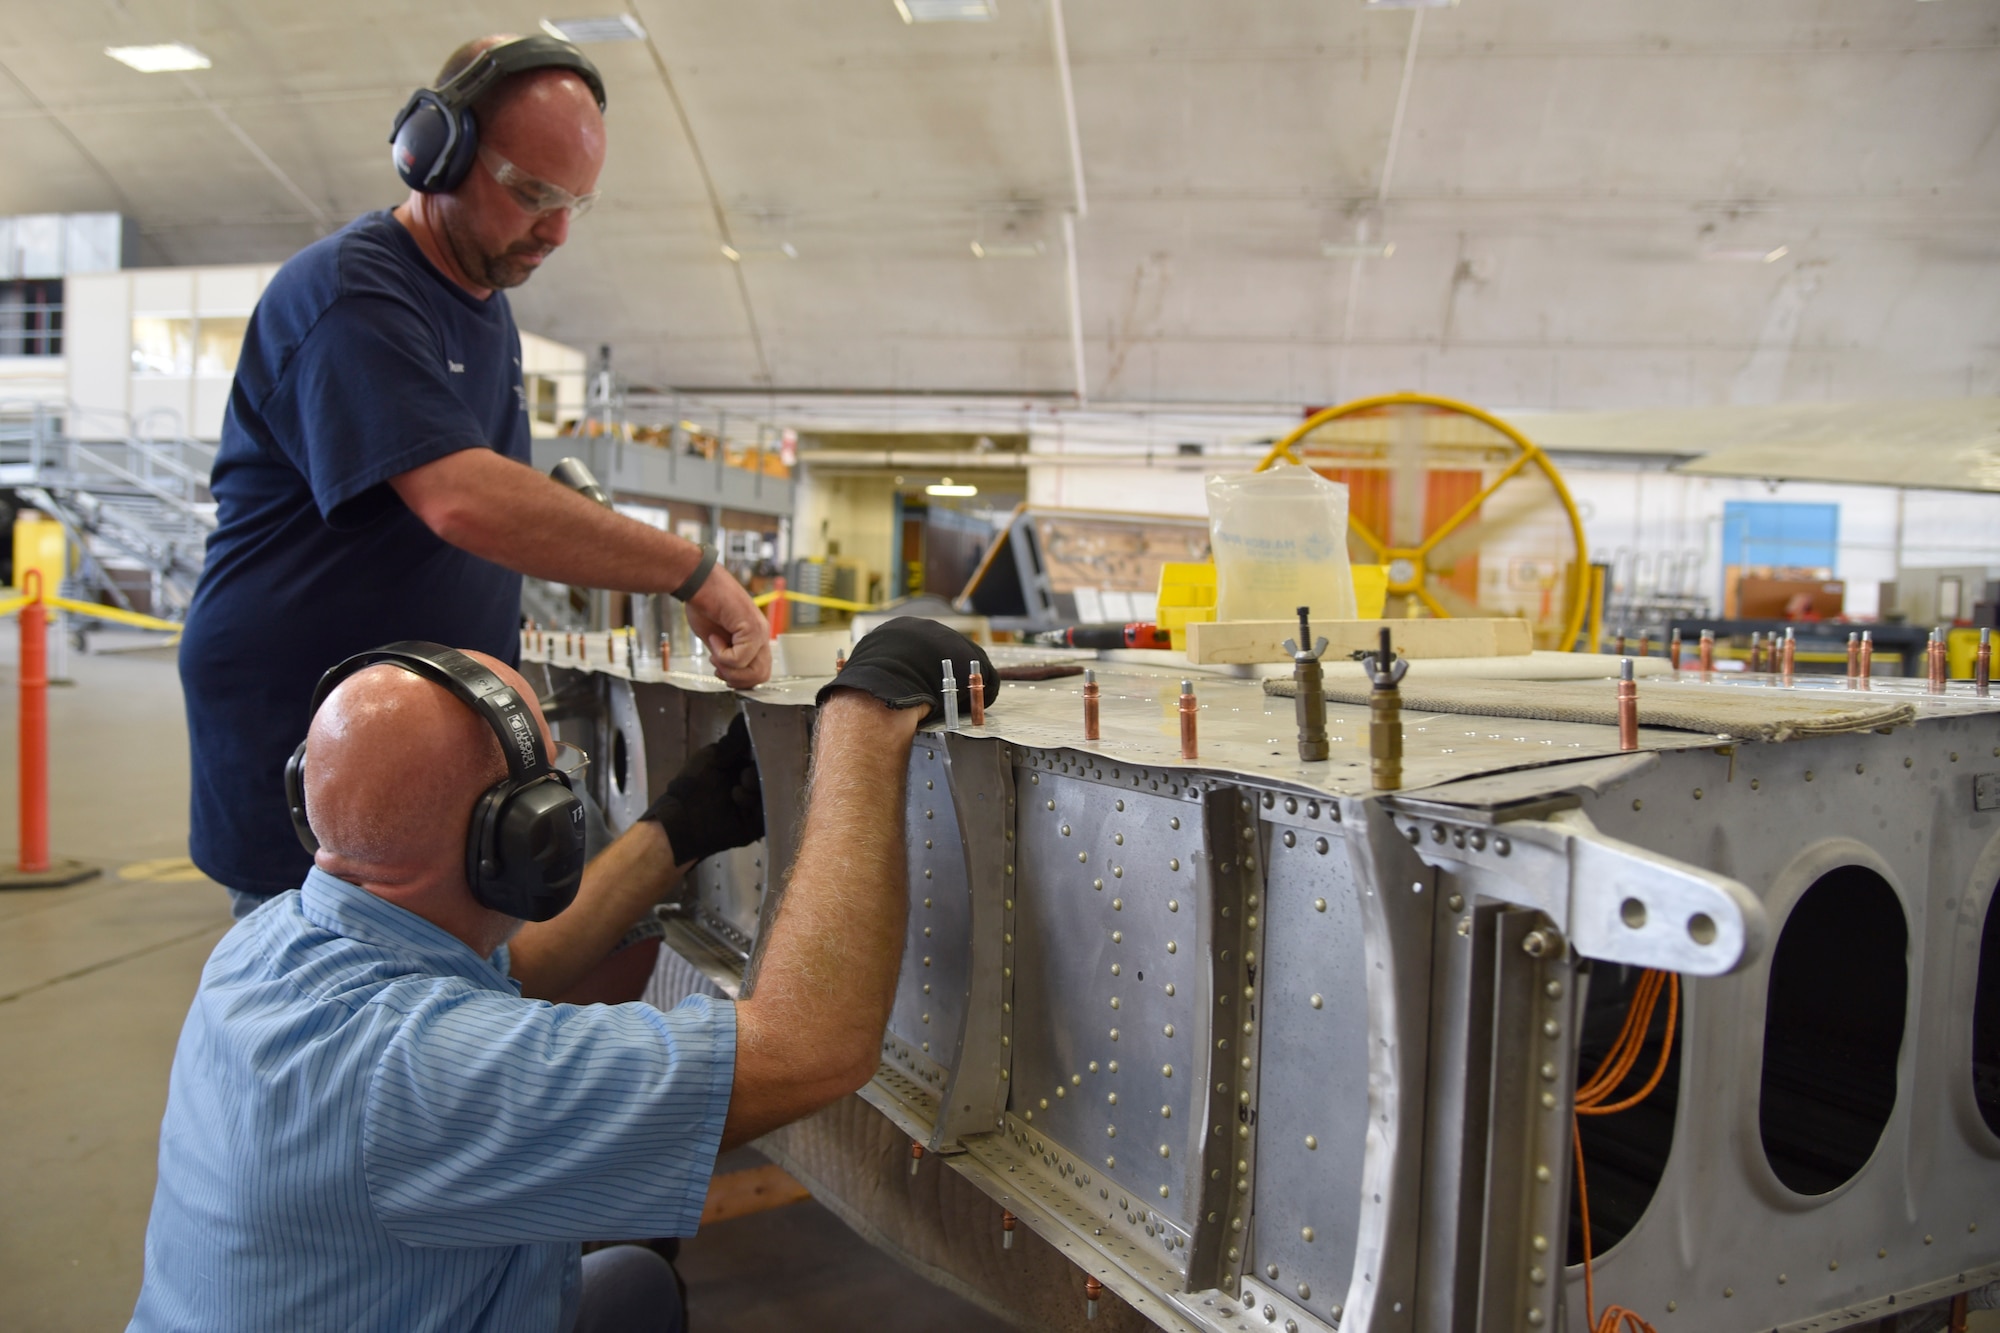 DAYTON, Ohio (06/2017) -- (From left to right) Restoration Specialists Duane Jones and Roger Brigner work on the B-17F "Memphis Belle"™ in the restoration hangar at the National Museum of the U.S. Air Force. The exhibit opening for this aircraft is planned for May 17, 2018.(U.S. Air Force photo by Ken LaRock)